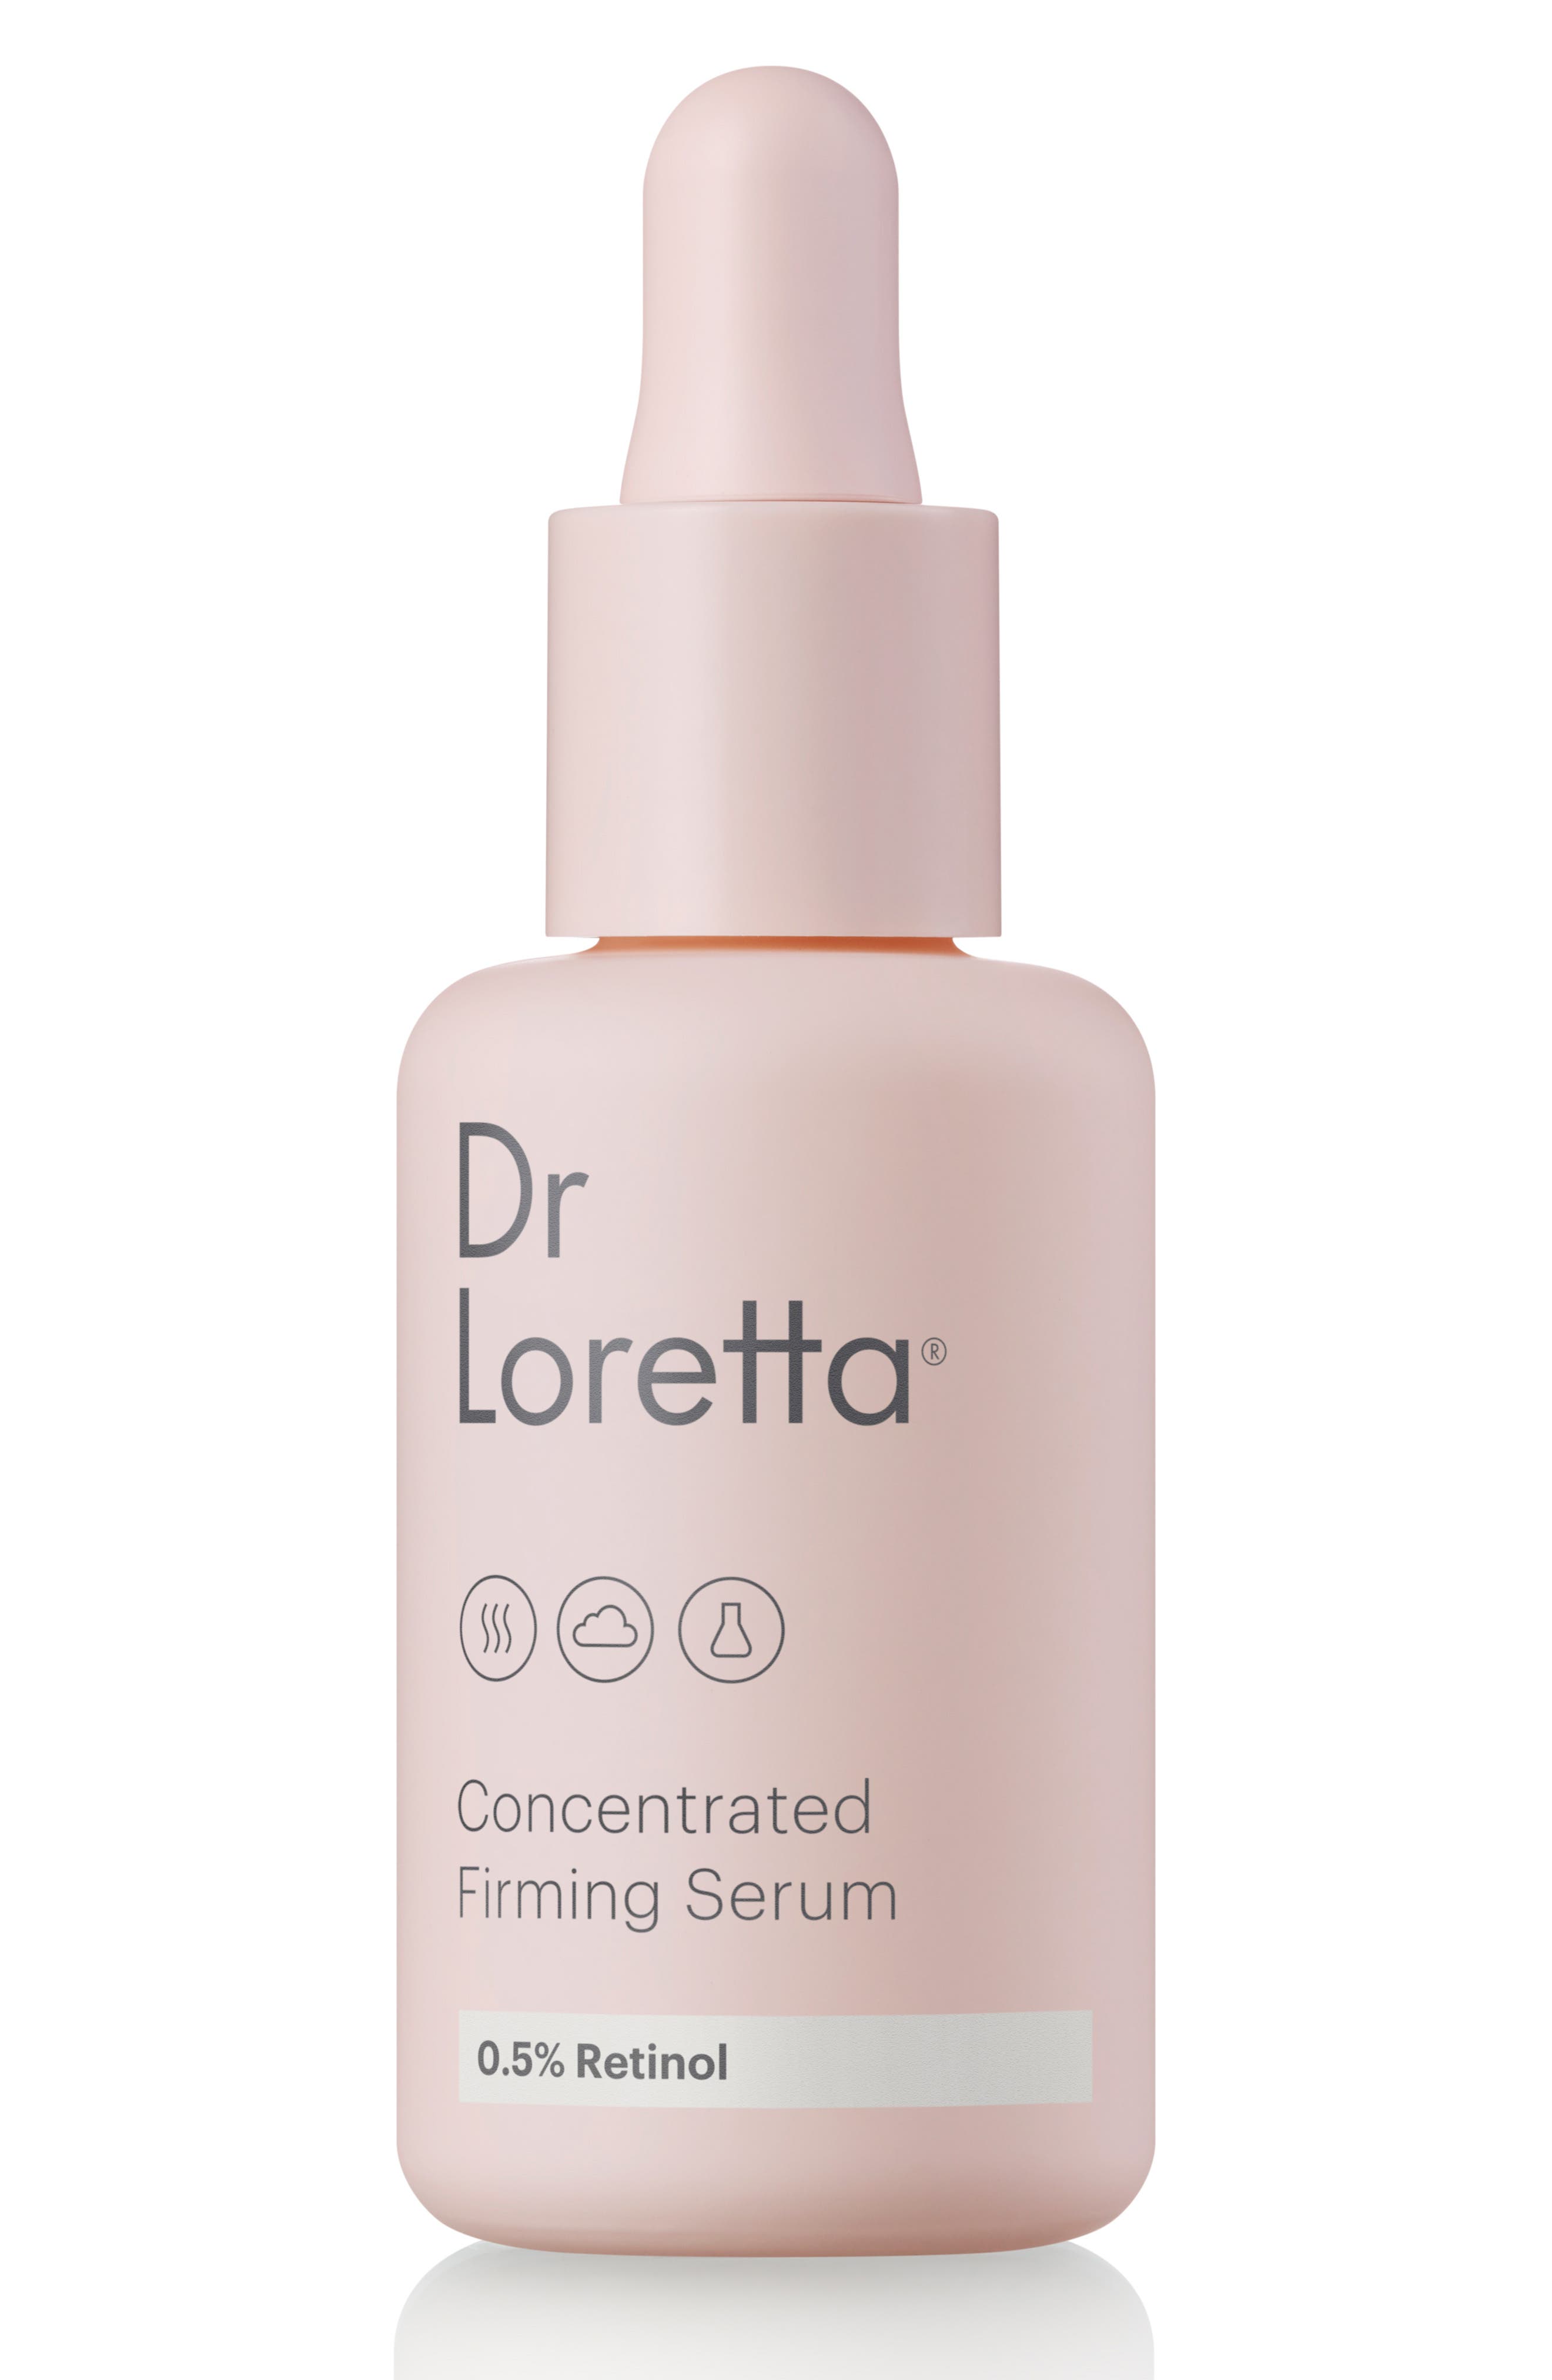 Dr. Loretta Concentrated Firming Serum at Nordstrom